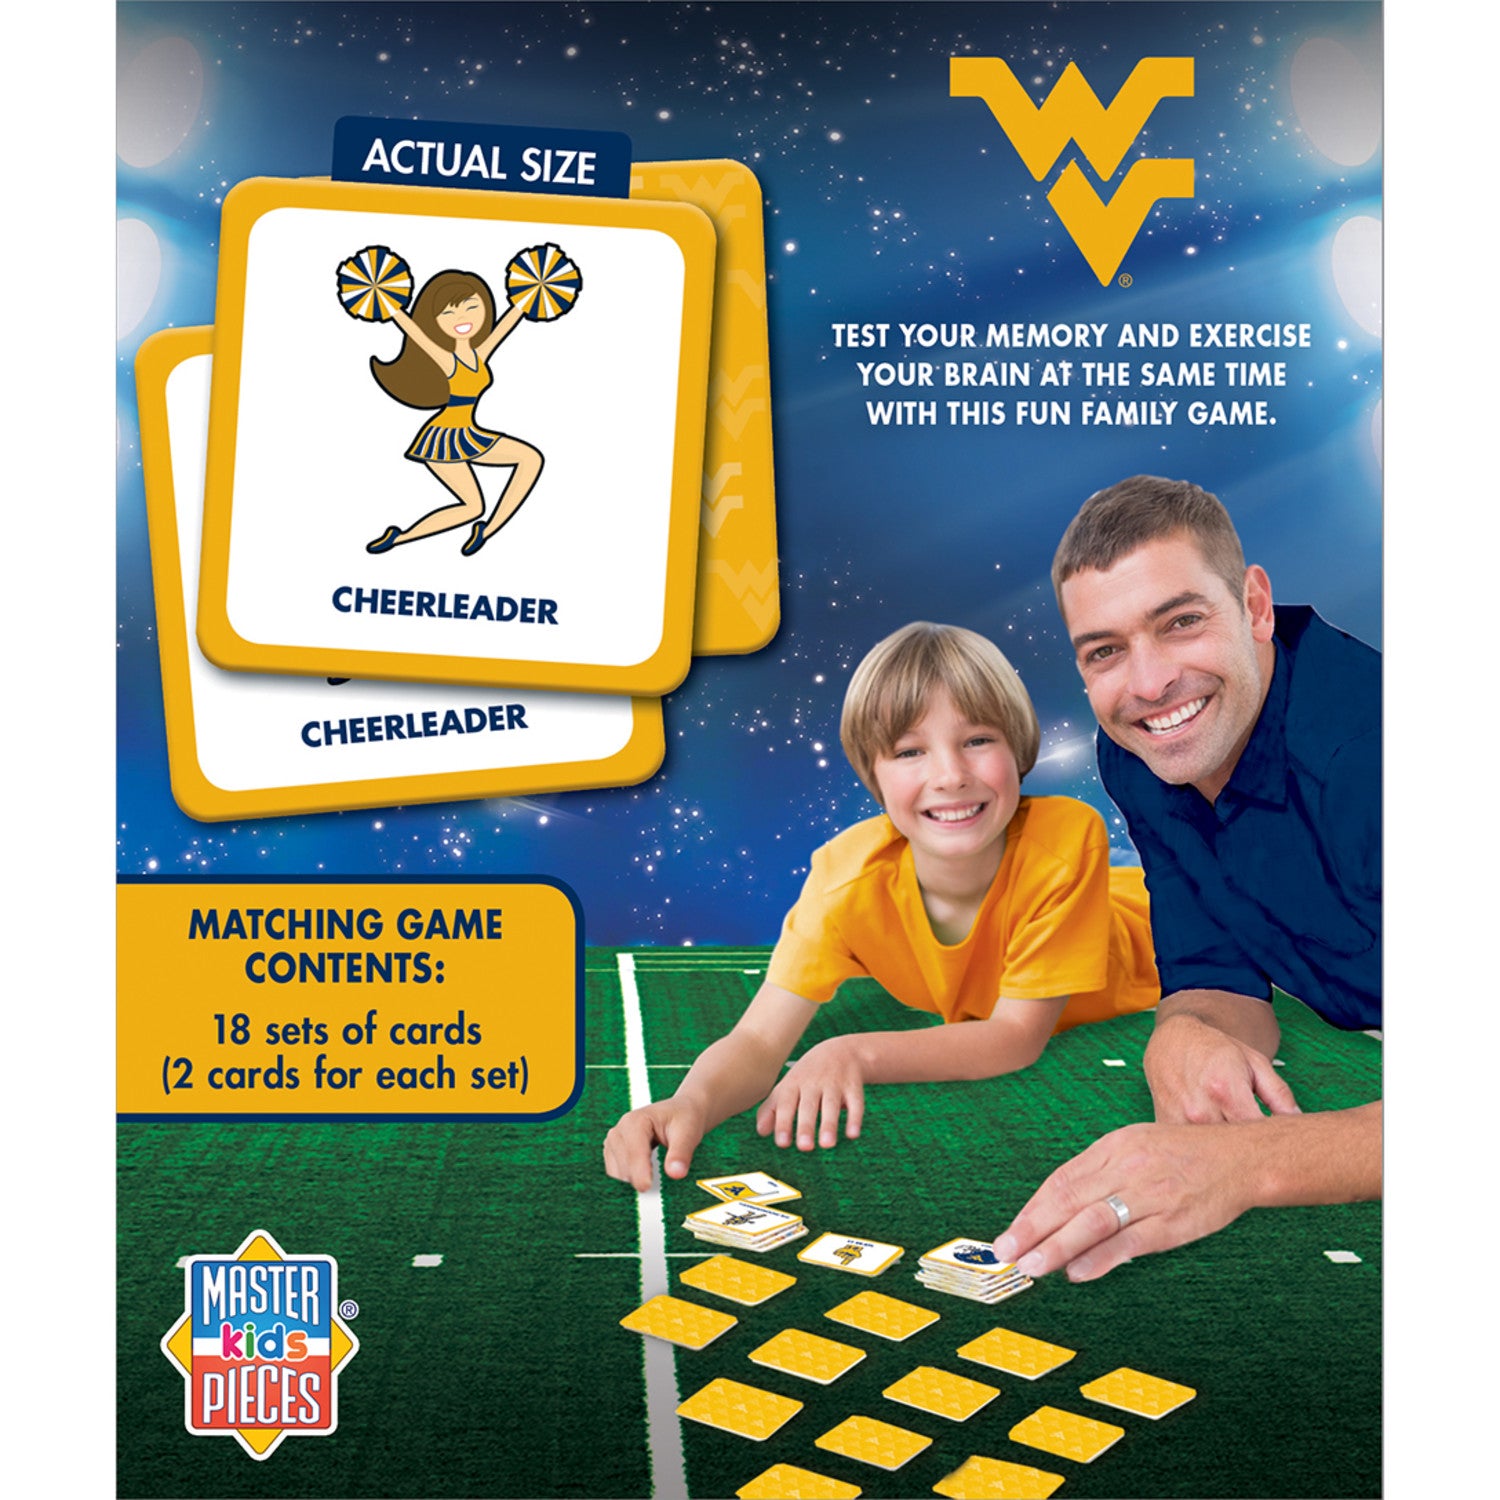 West Virginia Mountaineers Matching Game